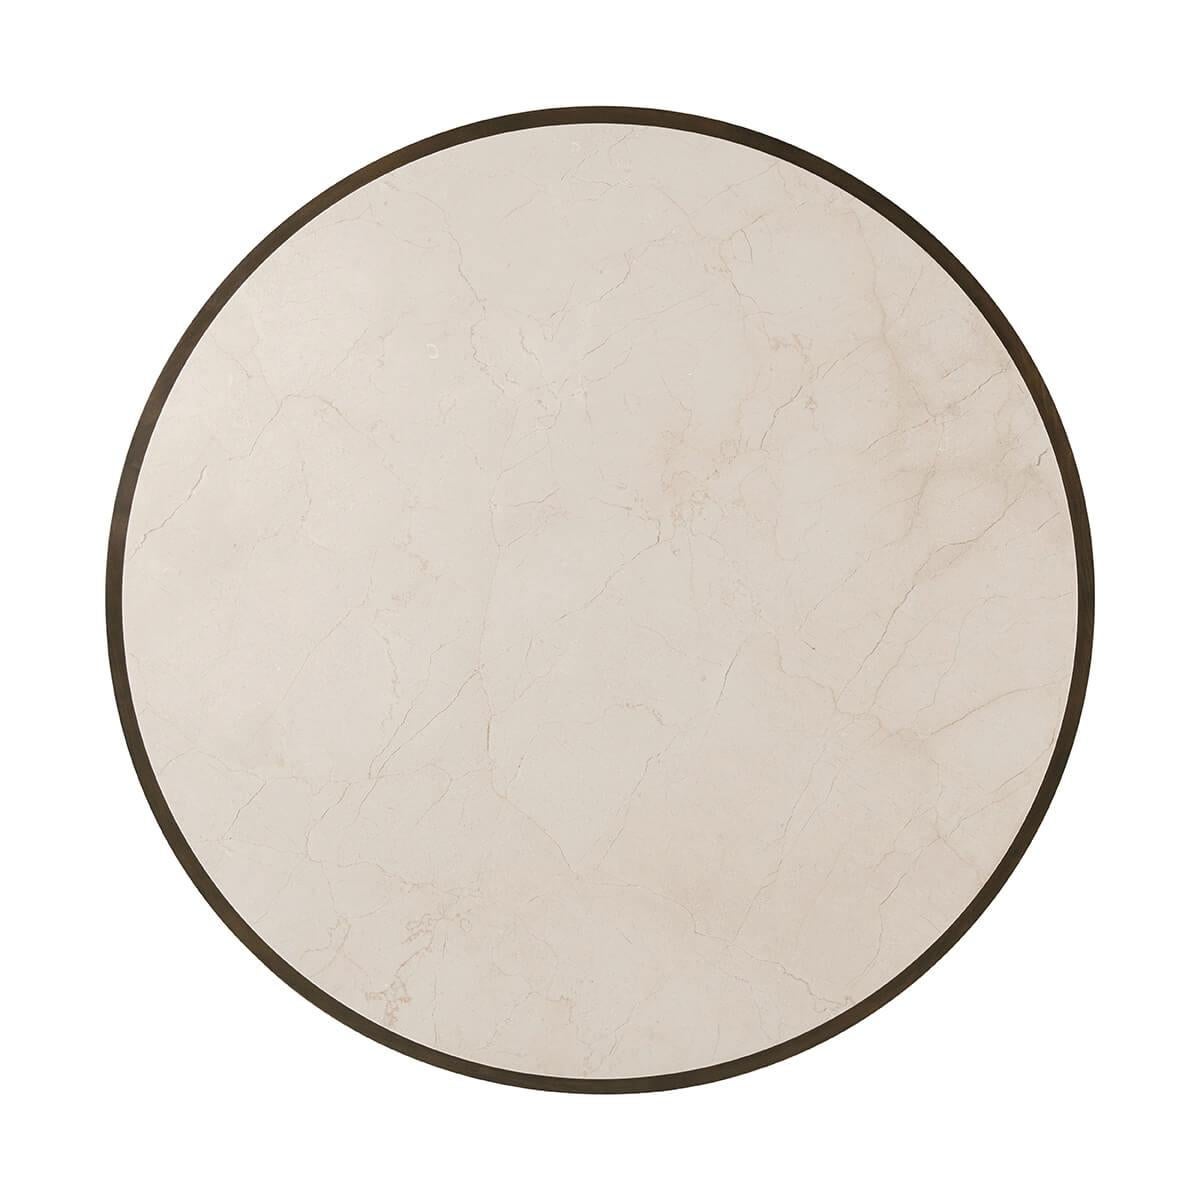  in our Bistre finish and complimented by a beautifully honed inset Crema Marfil marble stone top, features a sophisticated tapered silhouette and reeded carved details.

Dimensions: 54.25